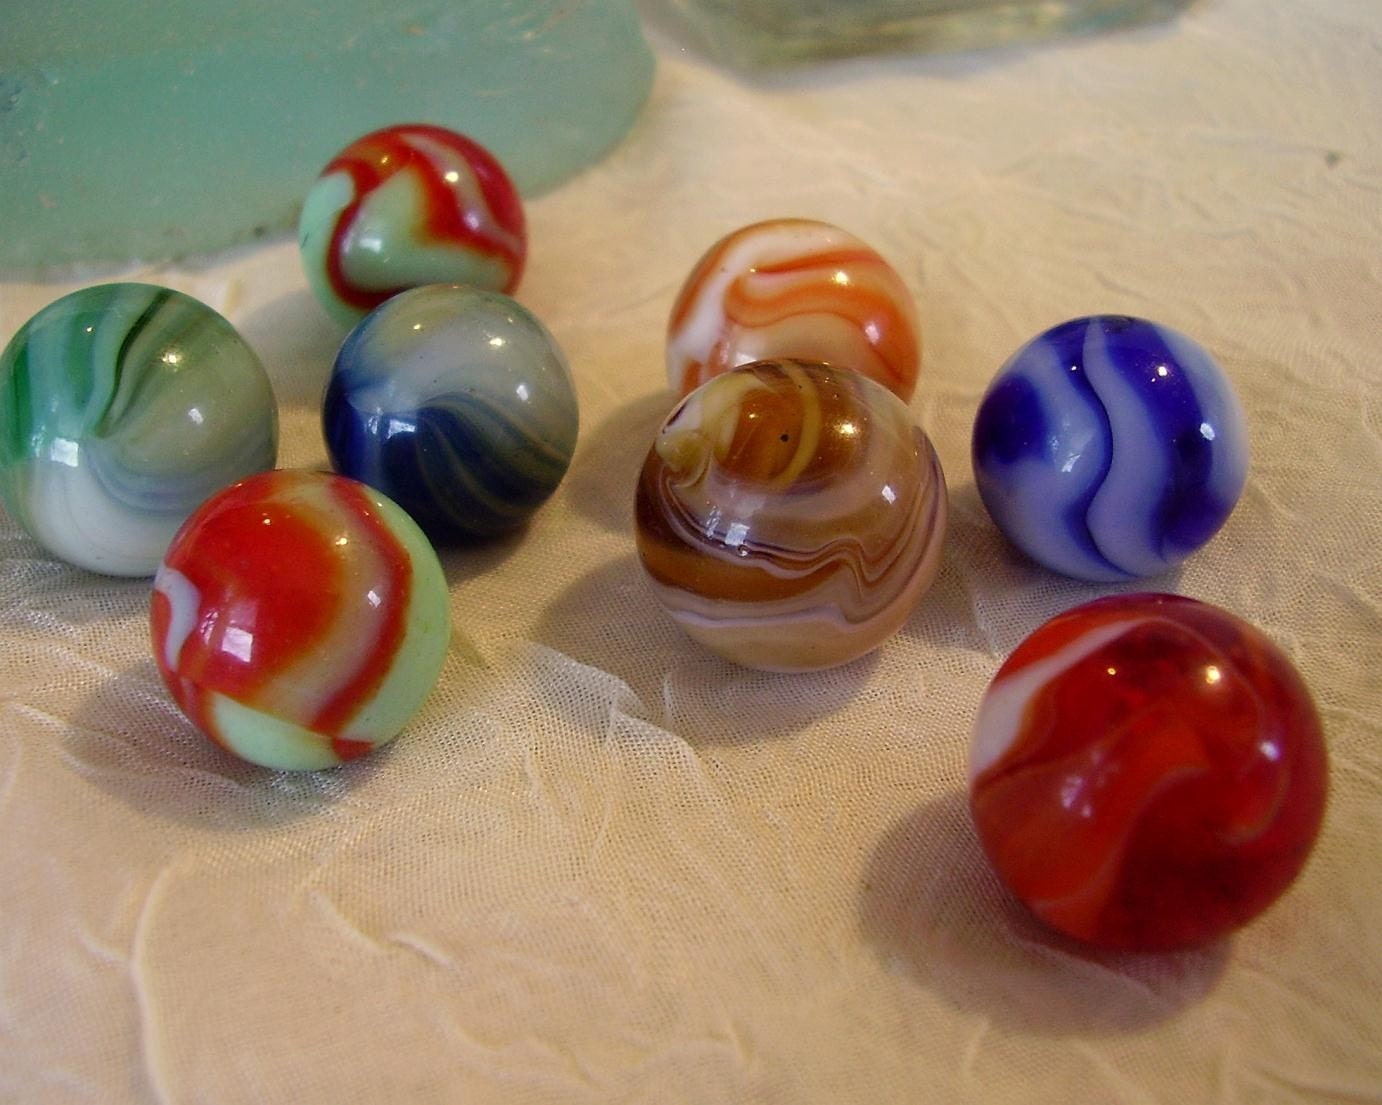 8 Old Collectible Marbles by MissUFO on Etsy